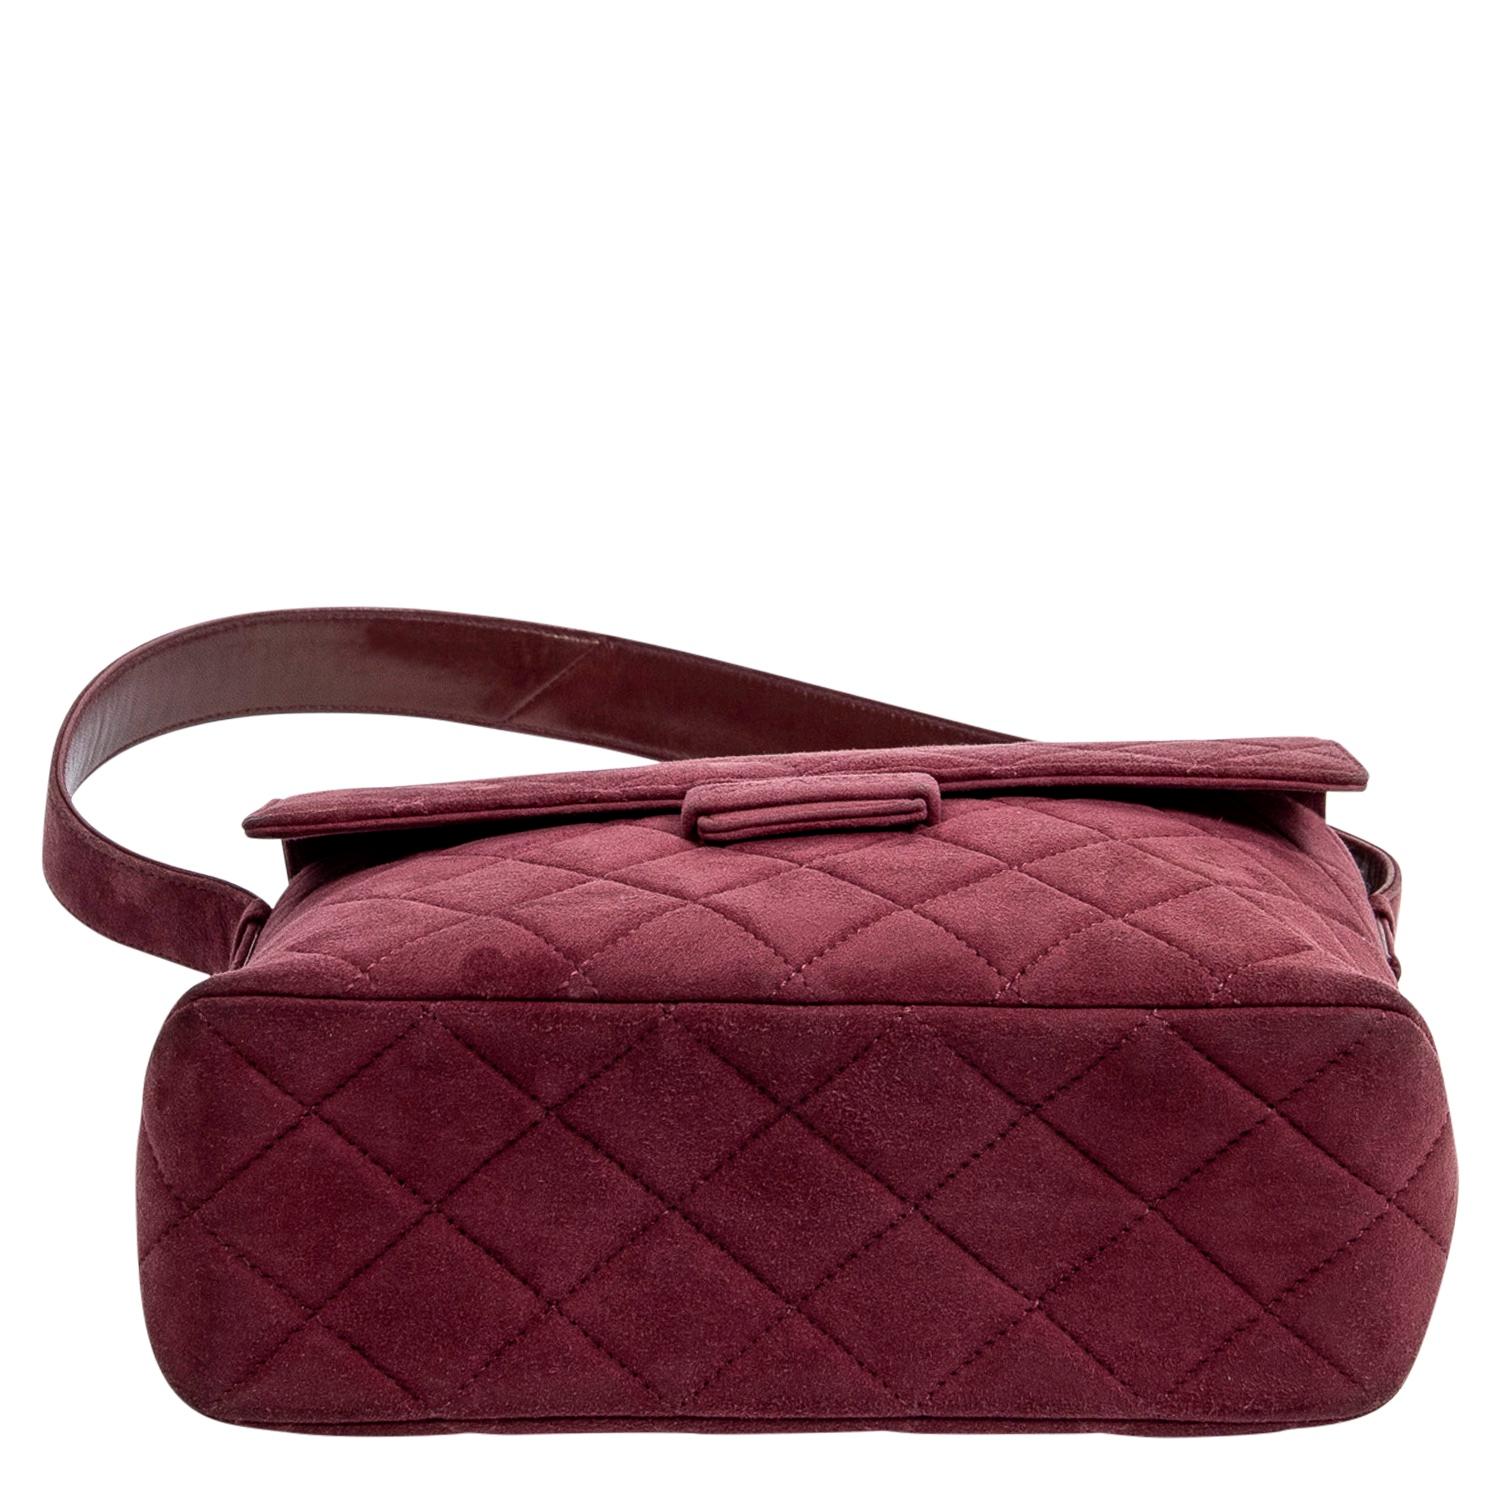 Chanel Burgundy Suede Logo Quilted Flap Bag For Sale 1